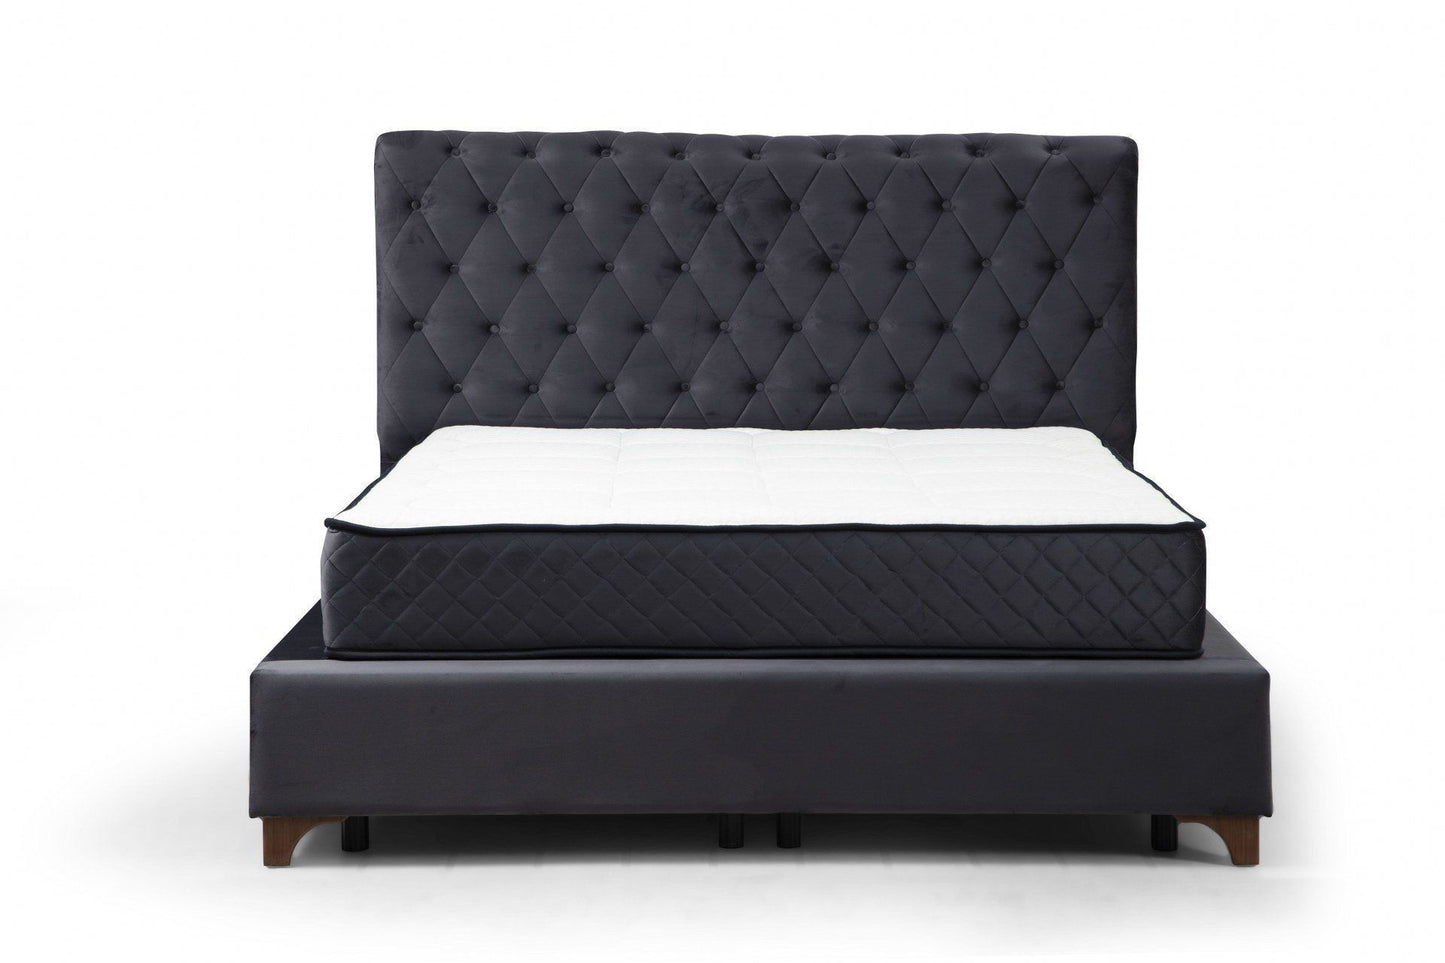 Deluxe Set 160 x 200 - Anthracite - Double Mattress, Base & Headboard